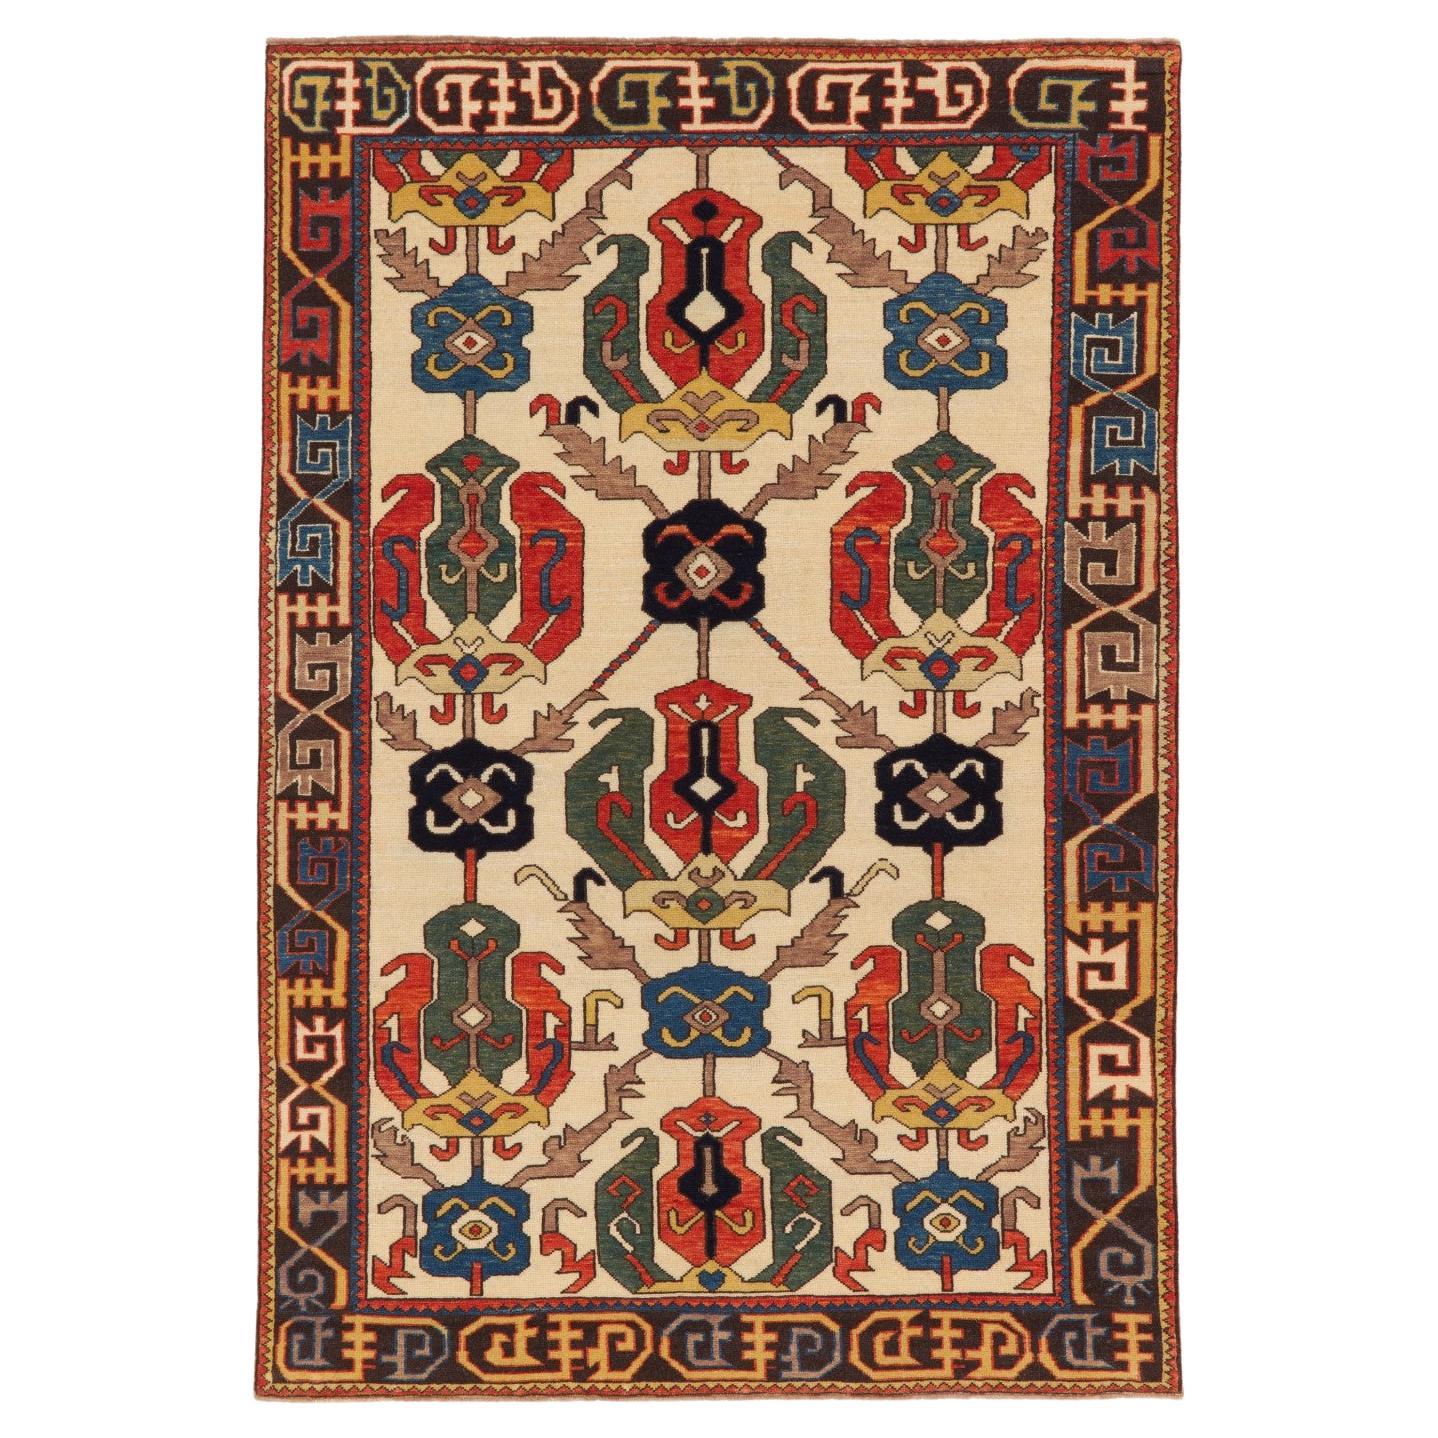 Ararat Rugs Kuba Rug with Palmettes Caucasian 19th C. Revival Rug, Natural Dyed